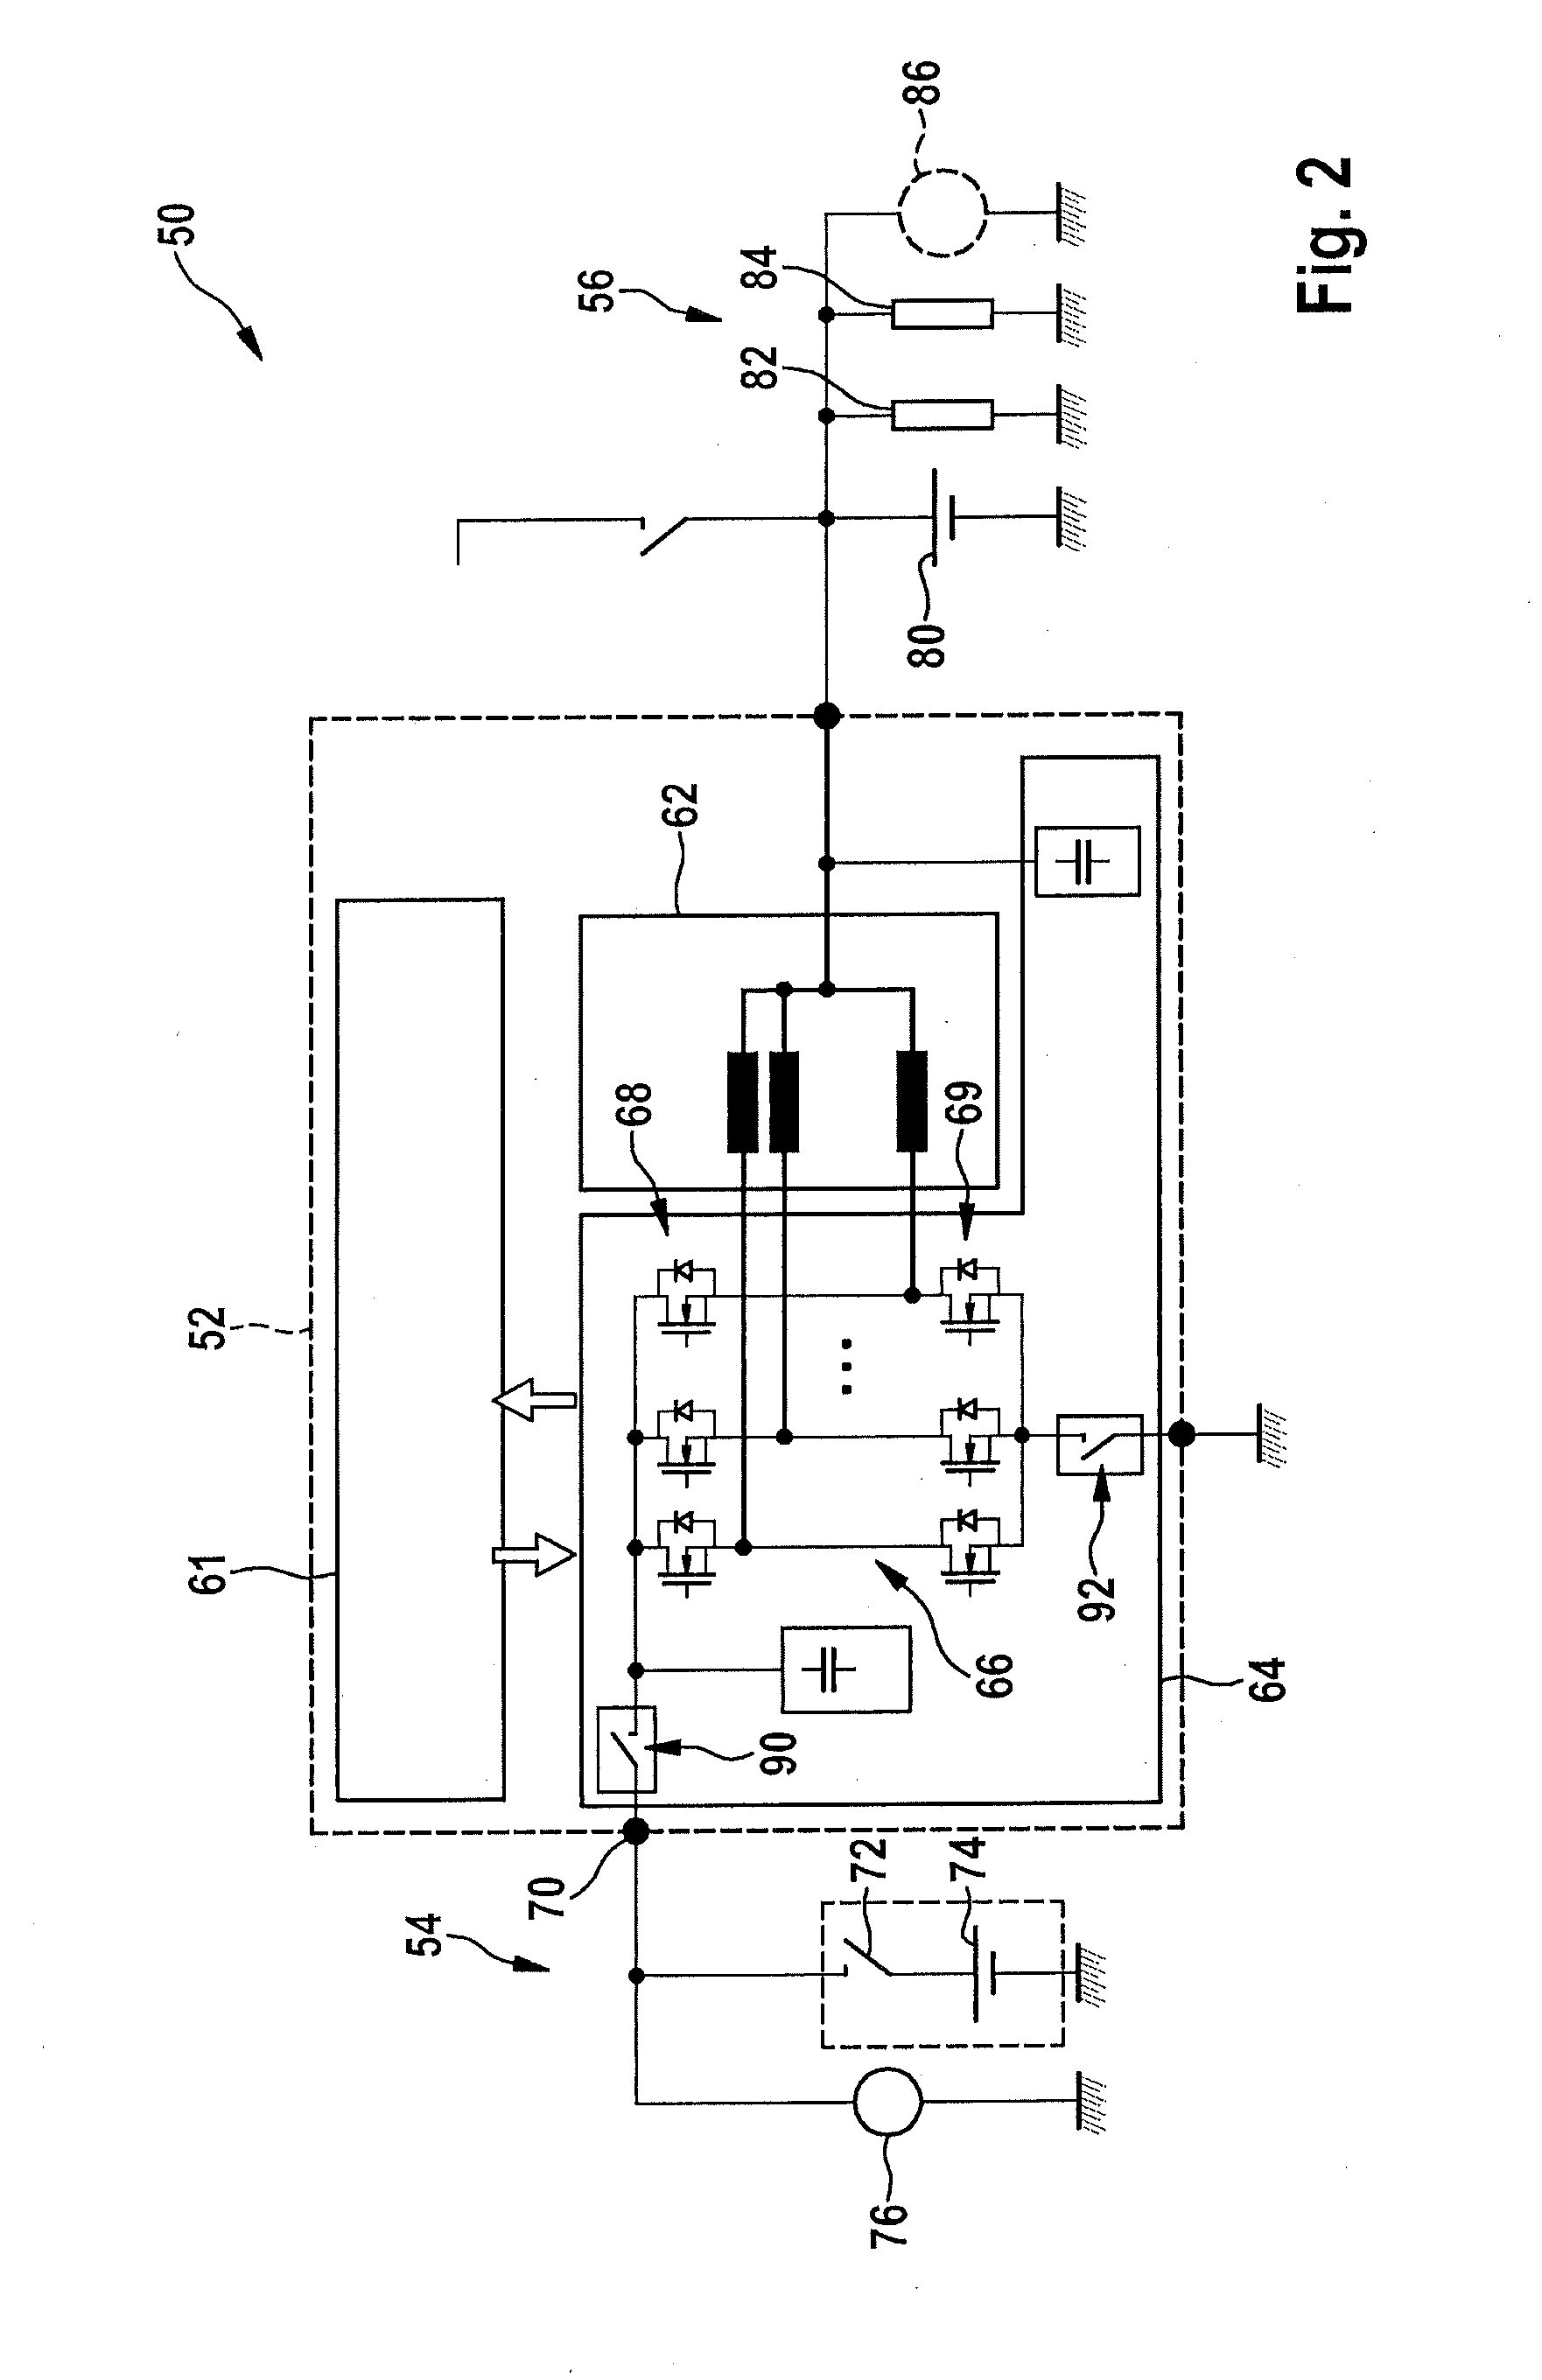 Protective circuit assemblage for a multi-voltage electrical system